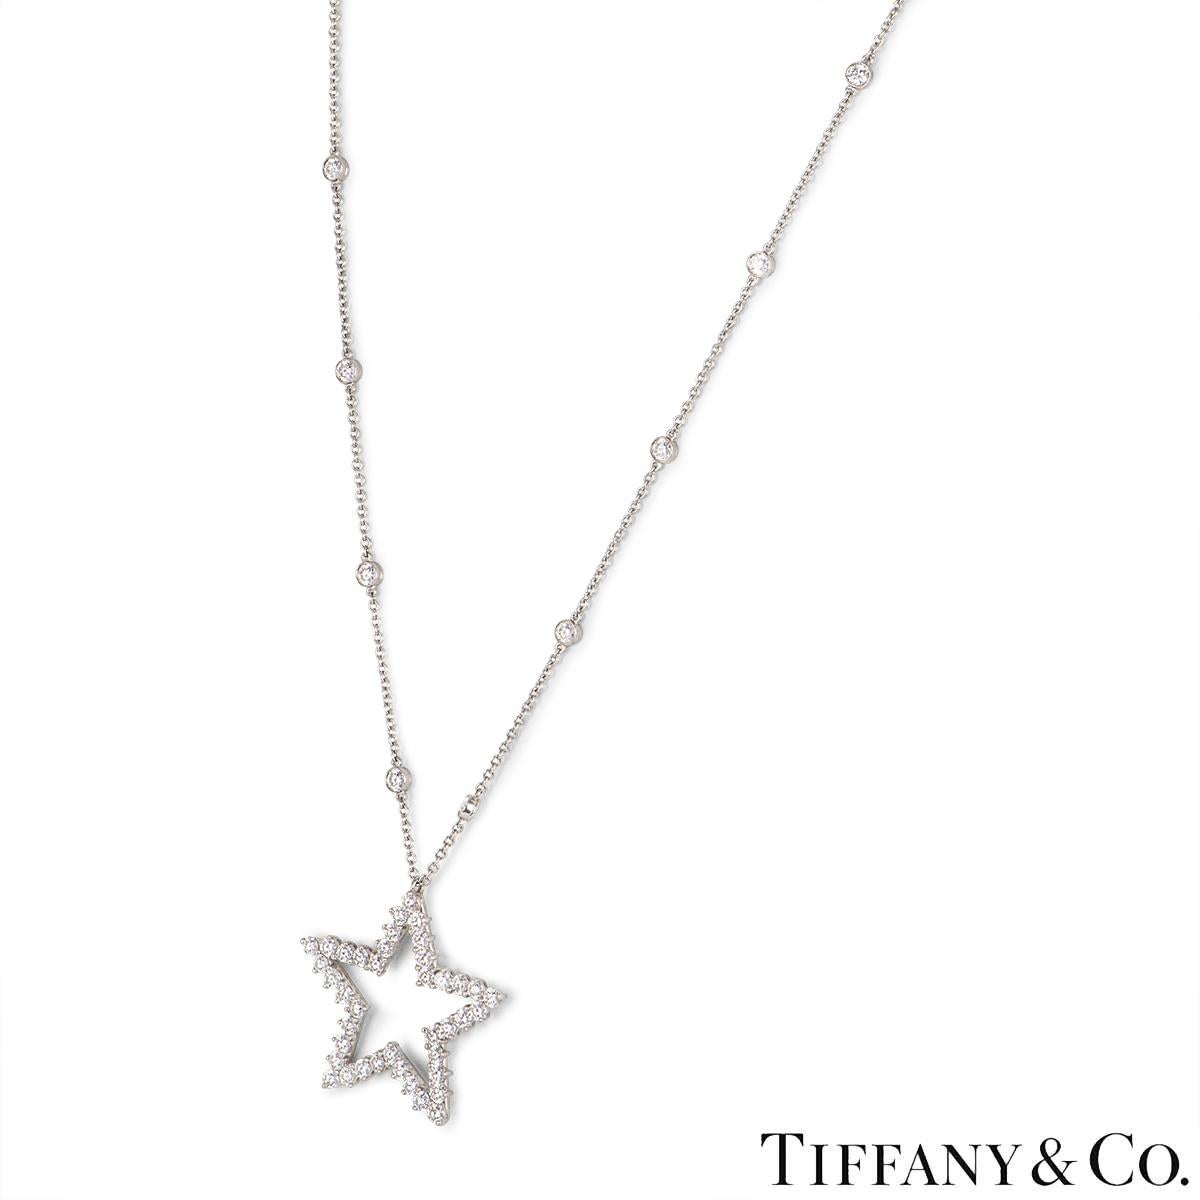 A beautiful platinum diamond star pendant necklace by Tiffany & Co. from the Diamonds By The Yard Collection. The pendant features an open star motif prong set with 40 round brilliant cut diamonds with an approximate weight of 3.20ct, F-G colour and